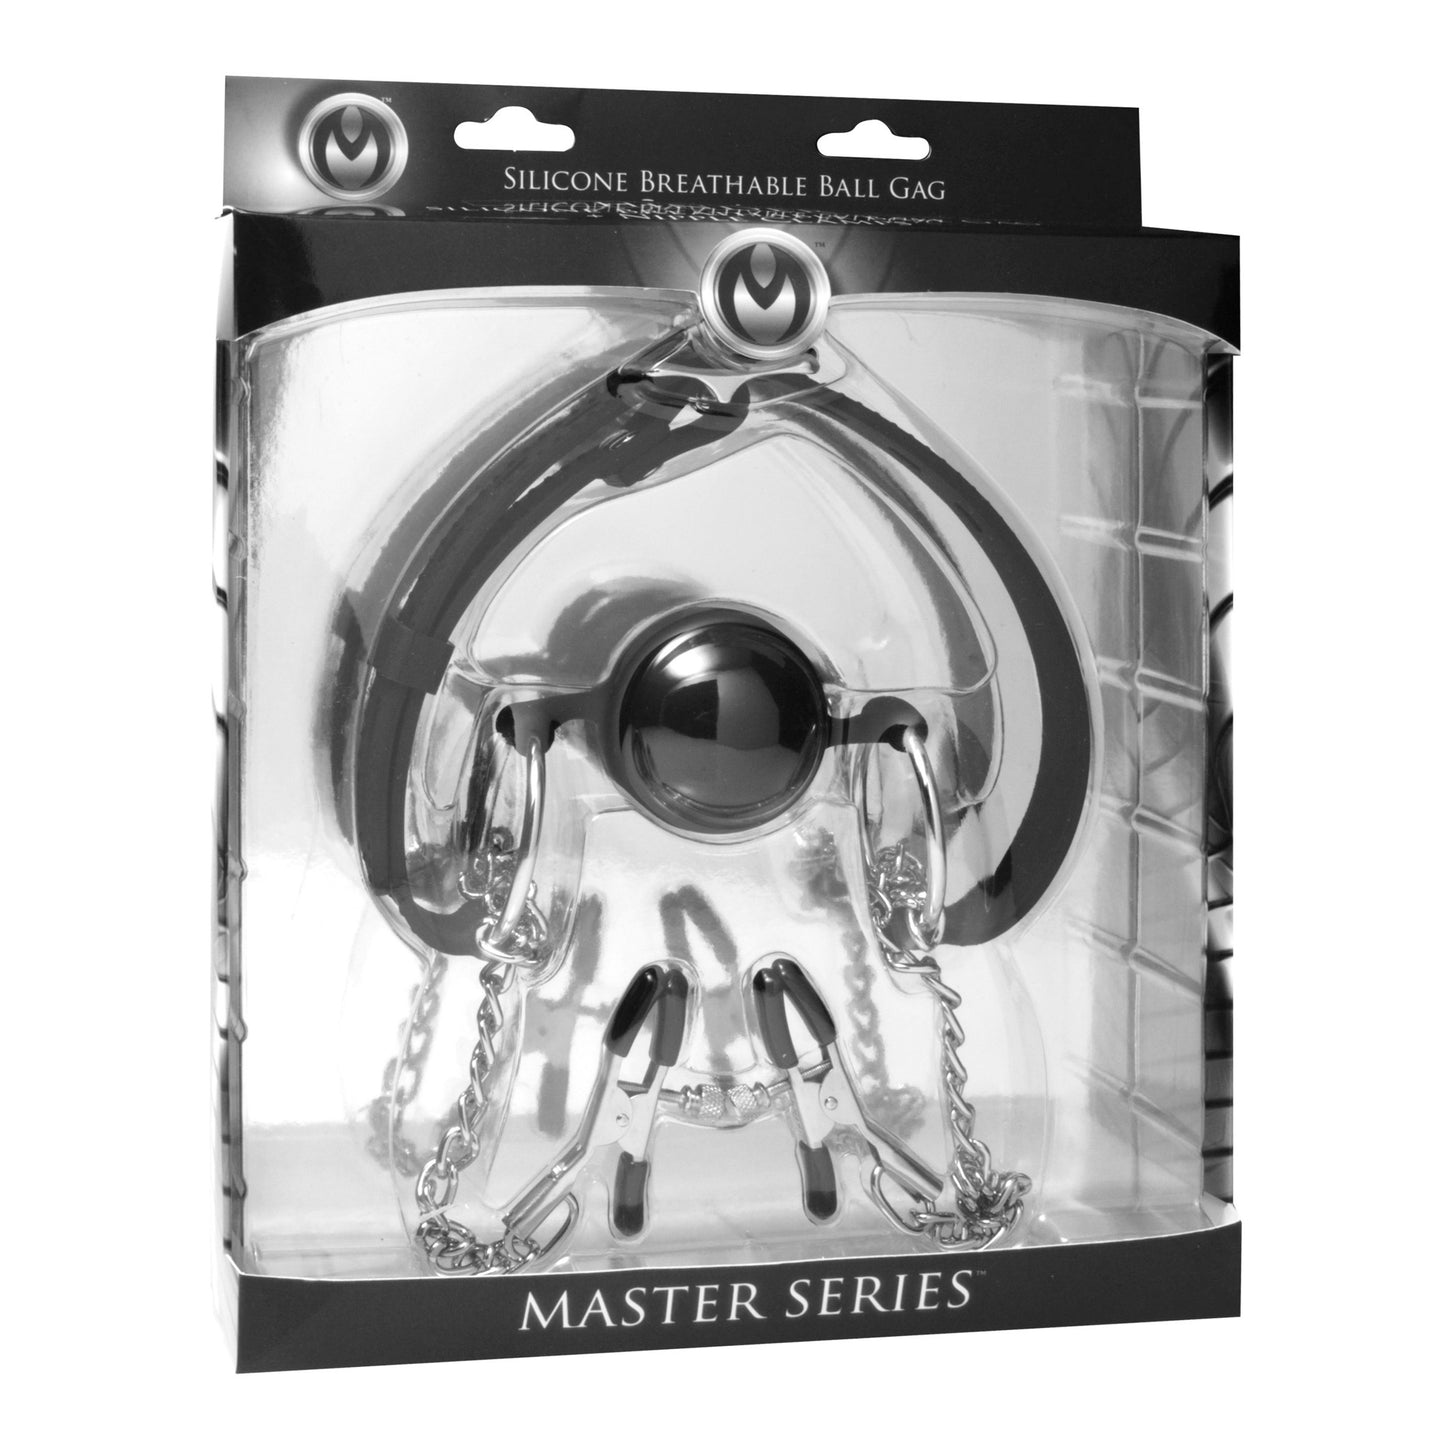 Hinder Breathable Silicone Ball Gag with Nipple Clamps - UABDSM